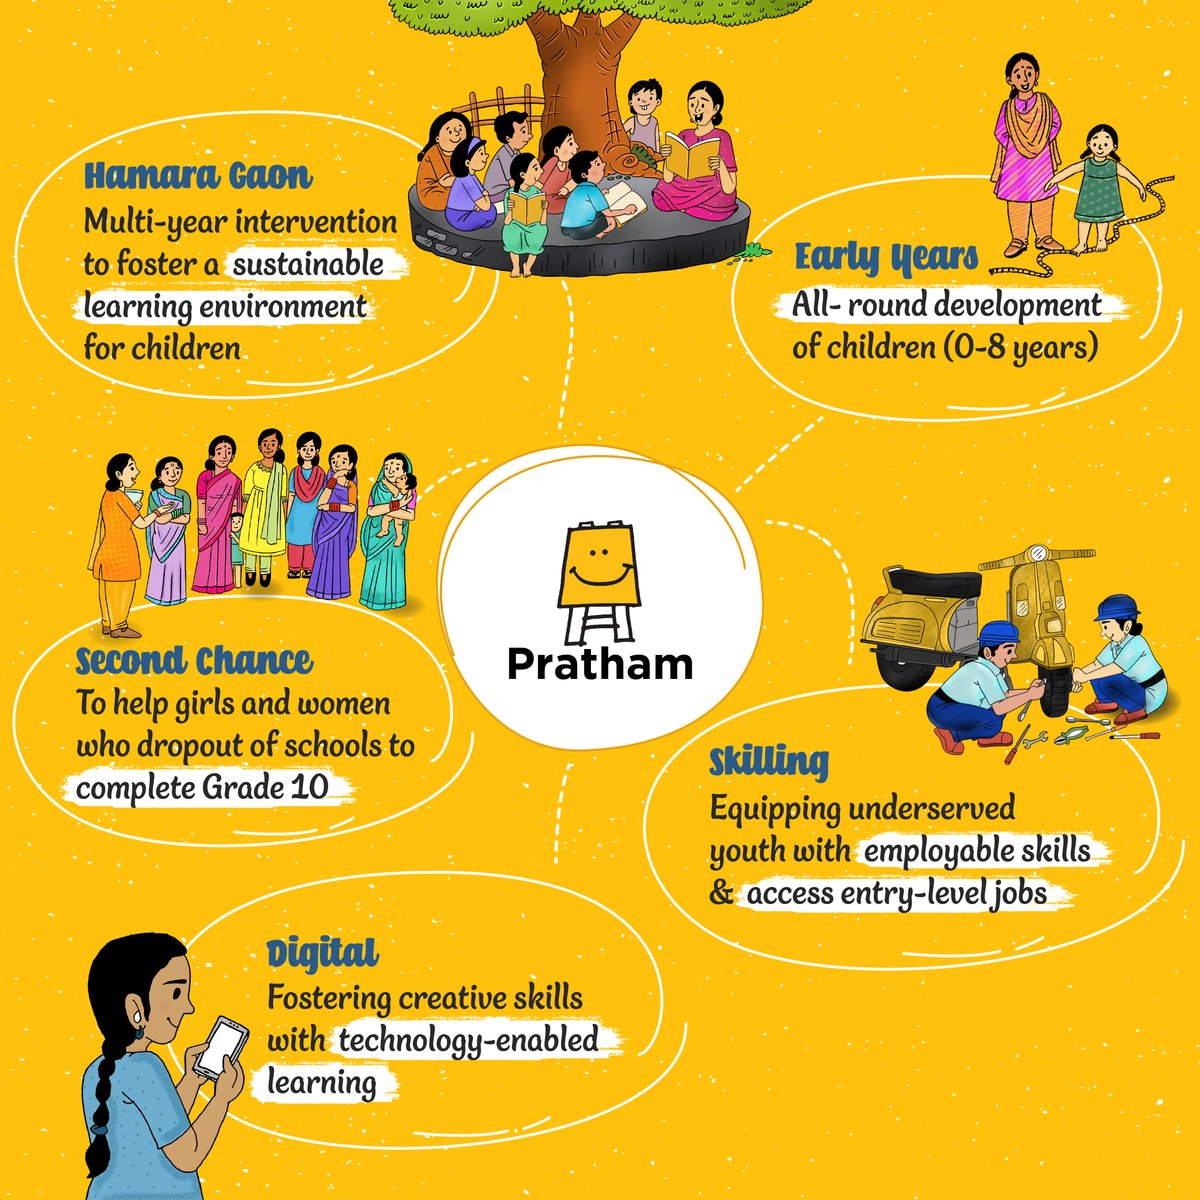 Pratham identifies gaps and opportunities in various age groups, developing learning solutions based on context. Our work extends from programs for early childhood education to youth skilling and employment. #pratham #learning #ngo #education #children #skills